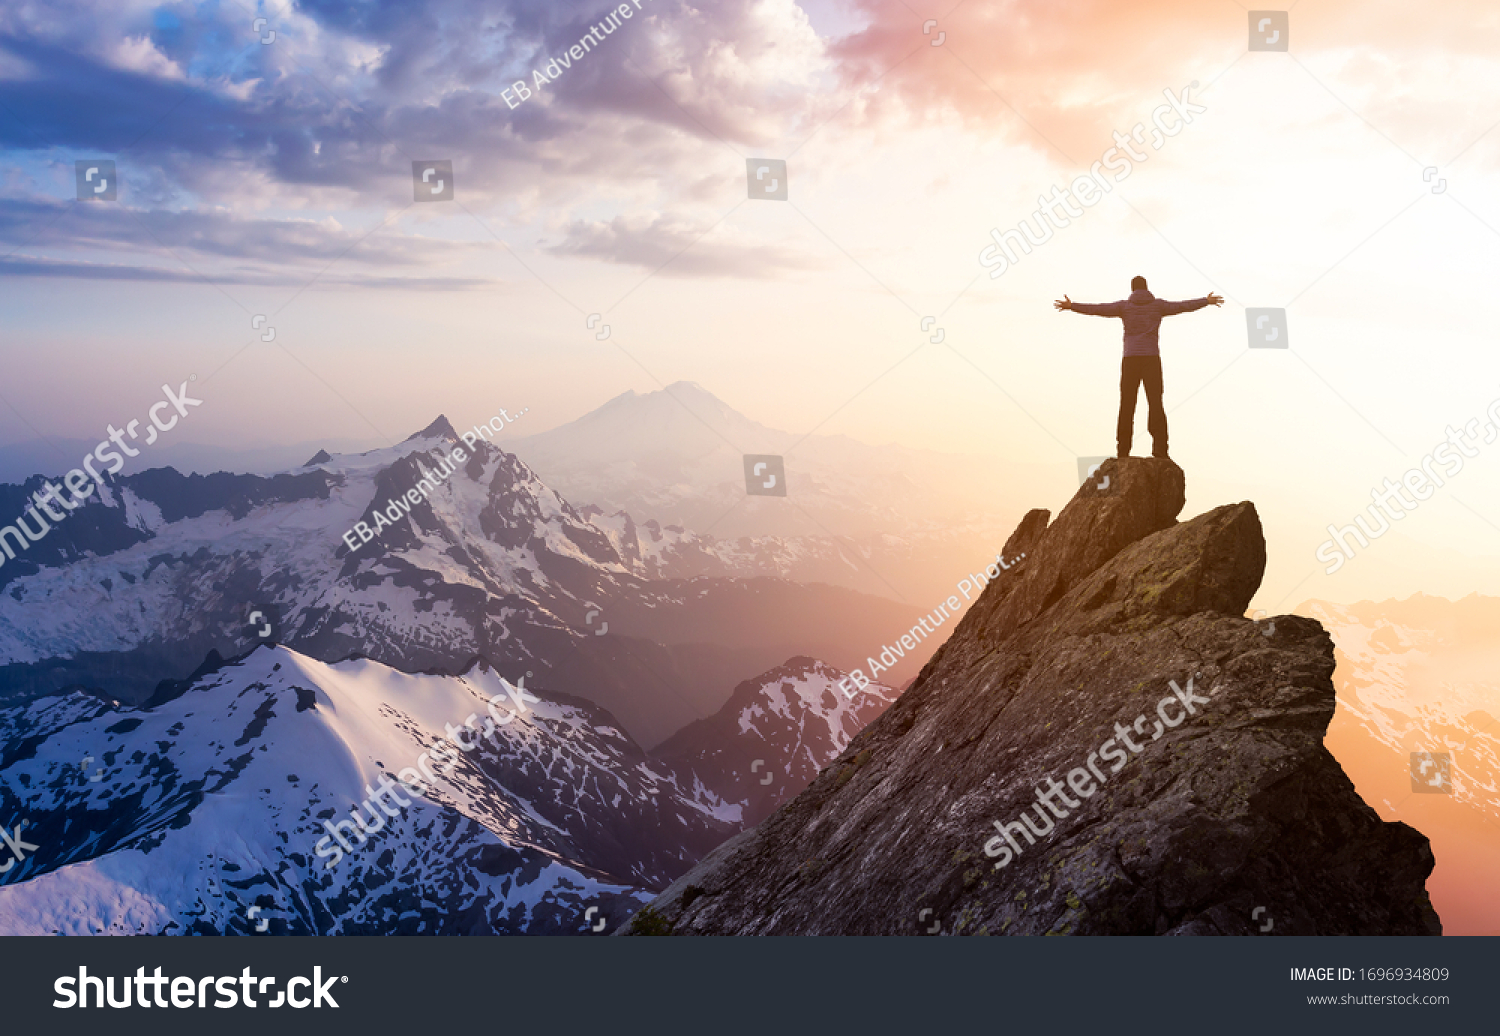 Adventure, Explore and Lifestyle Concept Composite. Adventurous Man Hiker With Hands Up on top of a Steep Rocky Cliff. Sunset or Sunrise. Landscape Taken from Washington, USA. #1696934809